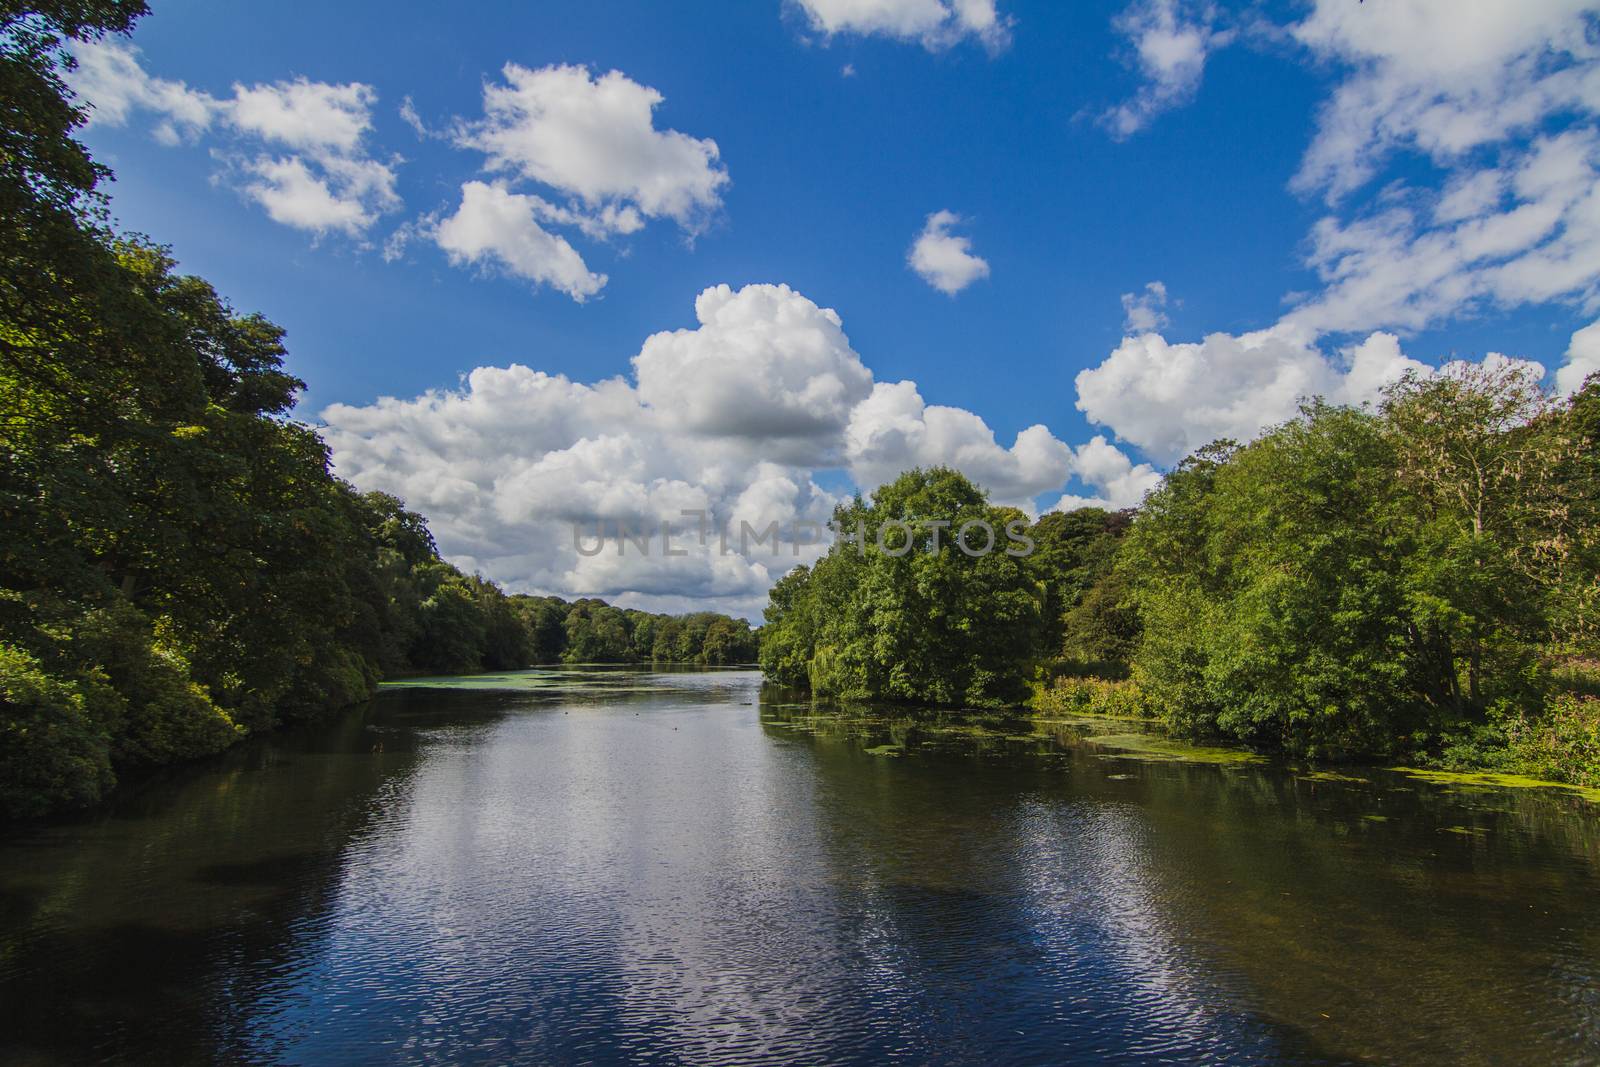 The English countryside during summer of a river and the surrounding reflections